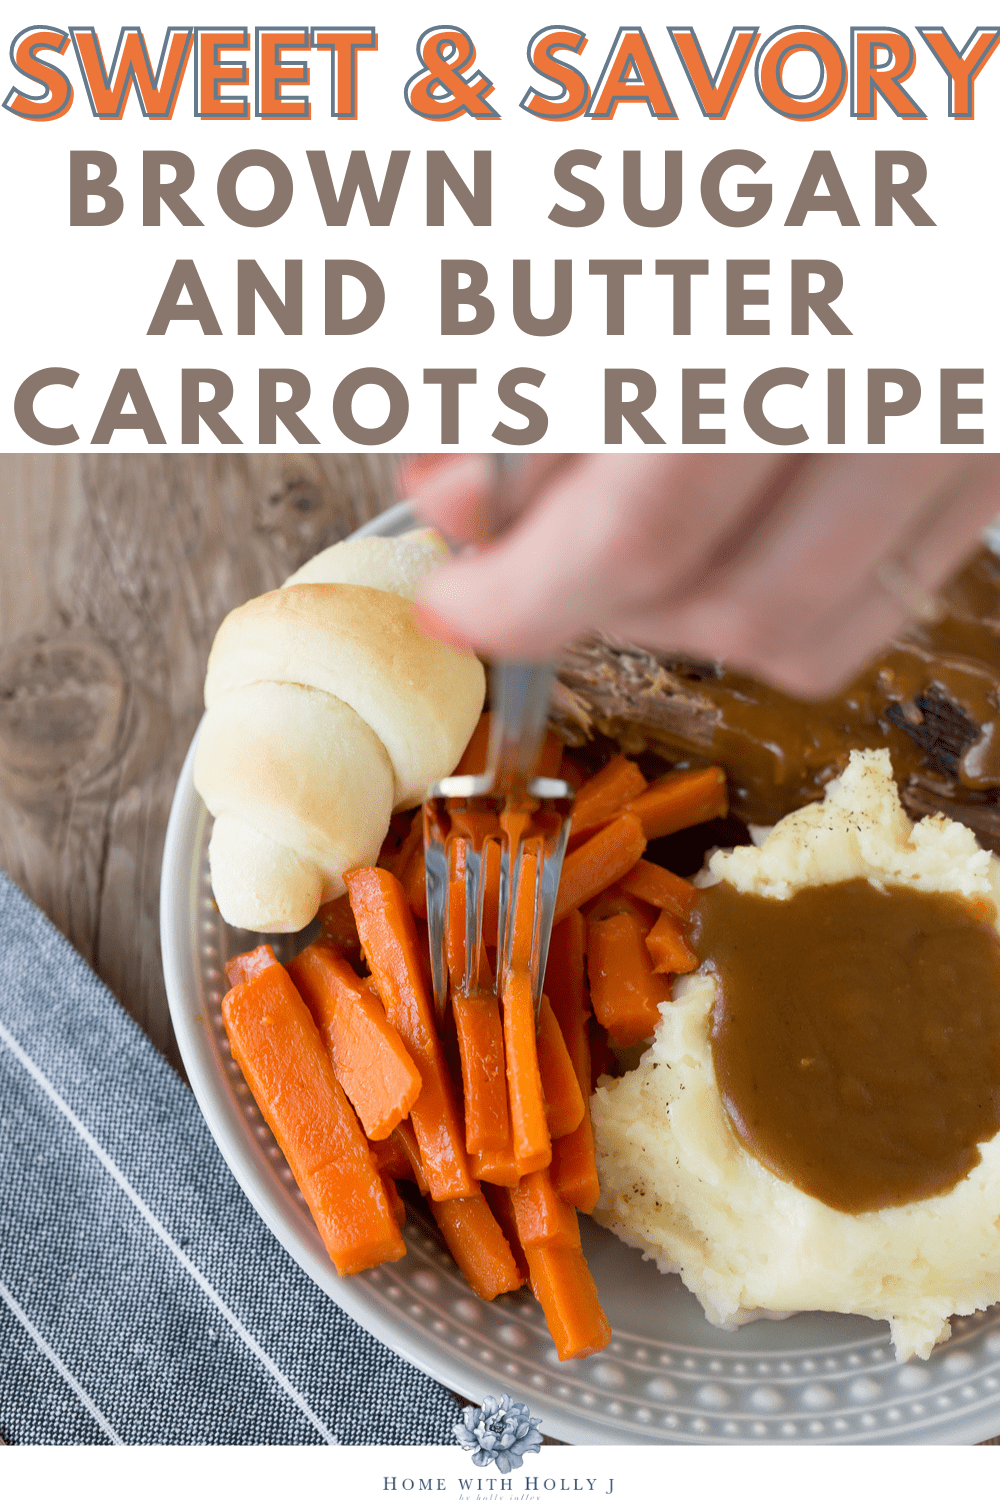 Indulge in the sweet and savory flavors of brown sugar butter carrots. Try this delicious recipe for a perfect side dish!